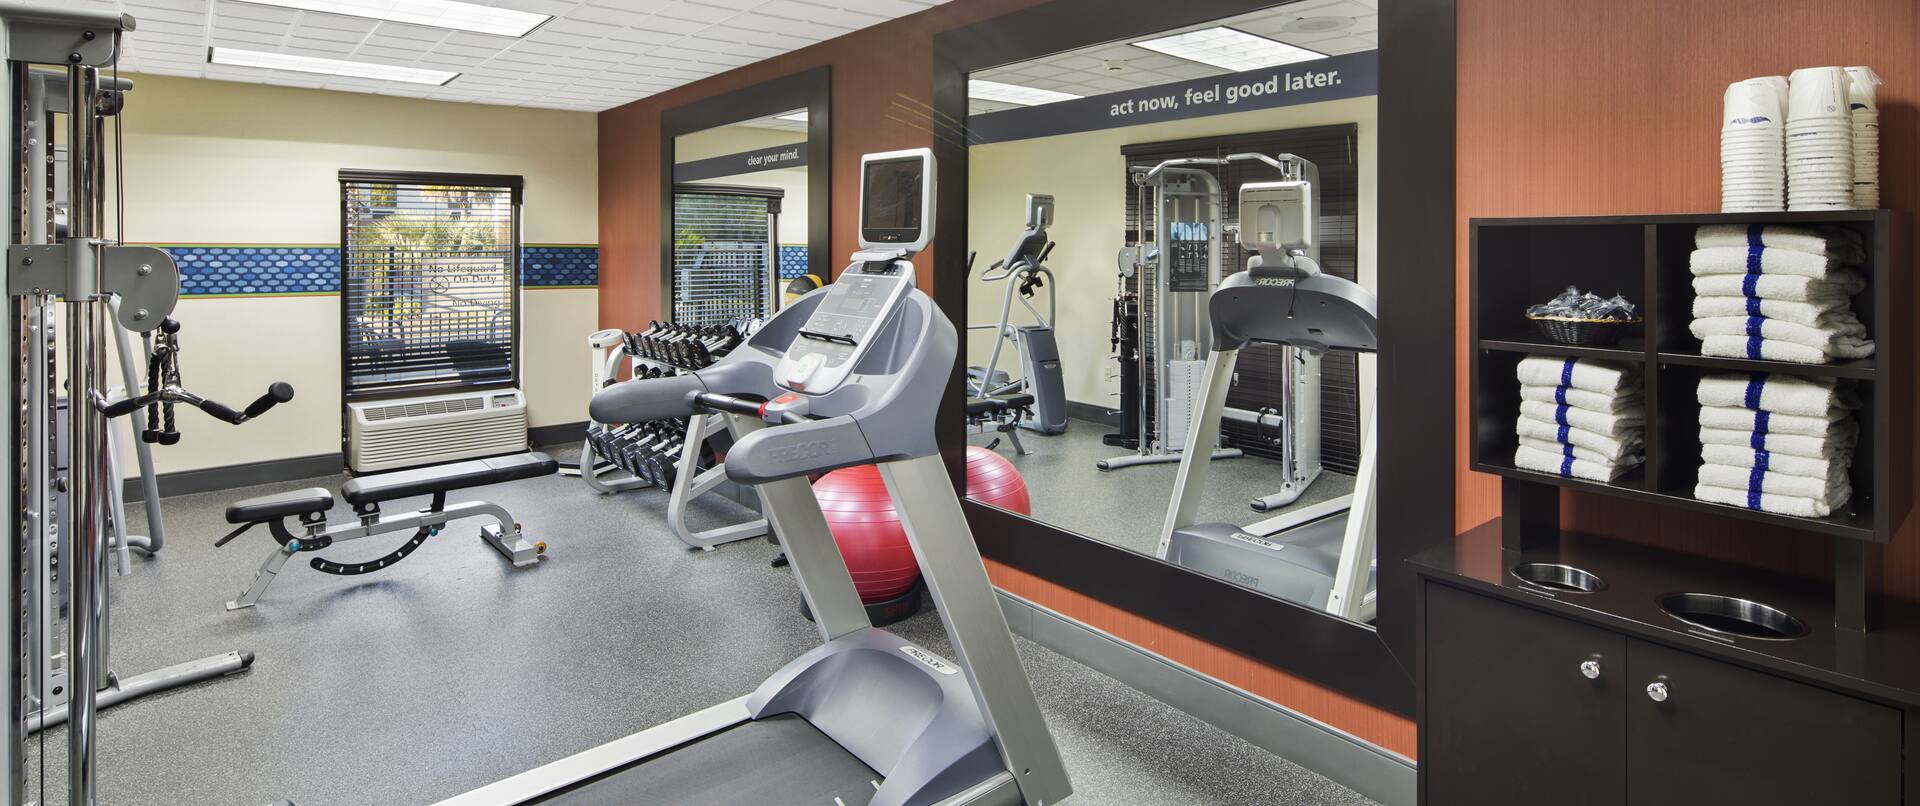 Fitness Center with Treadmill, Weight Machine, Weight Bench and Dumbbell Rack